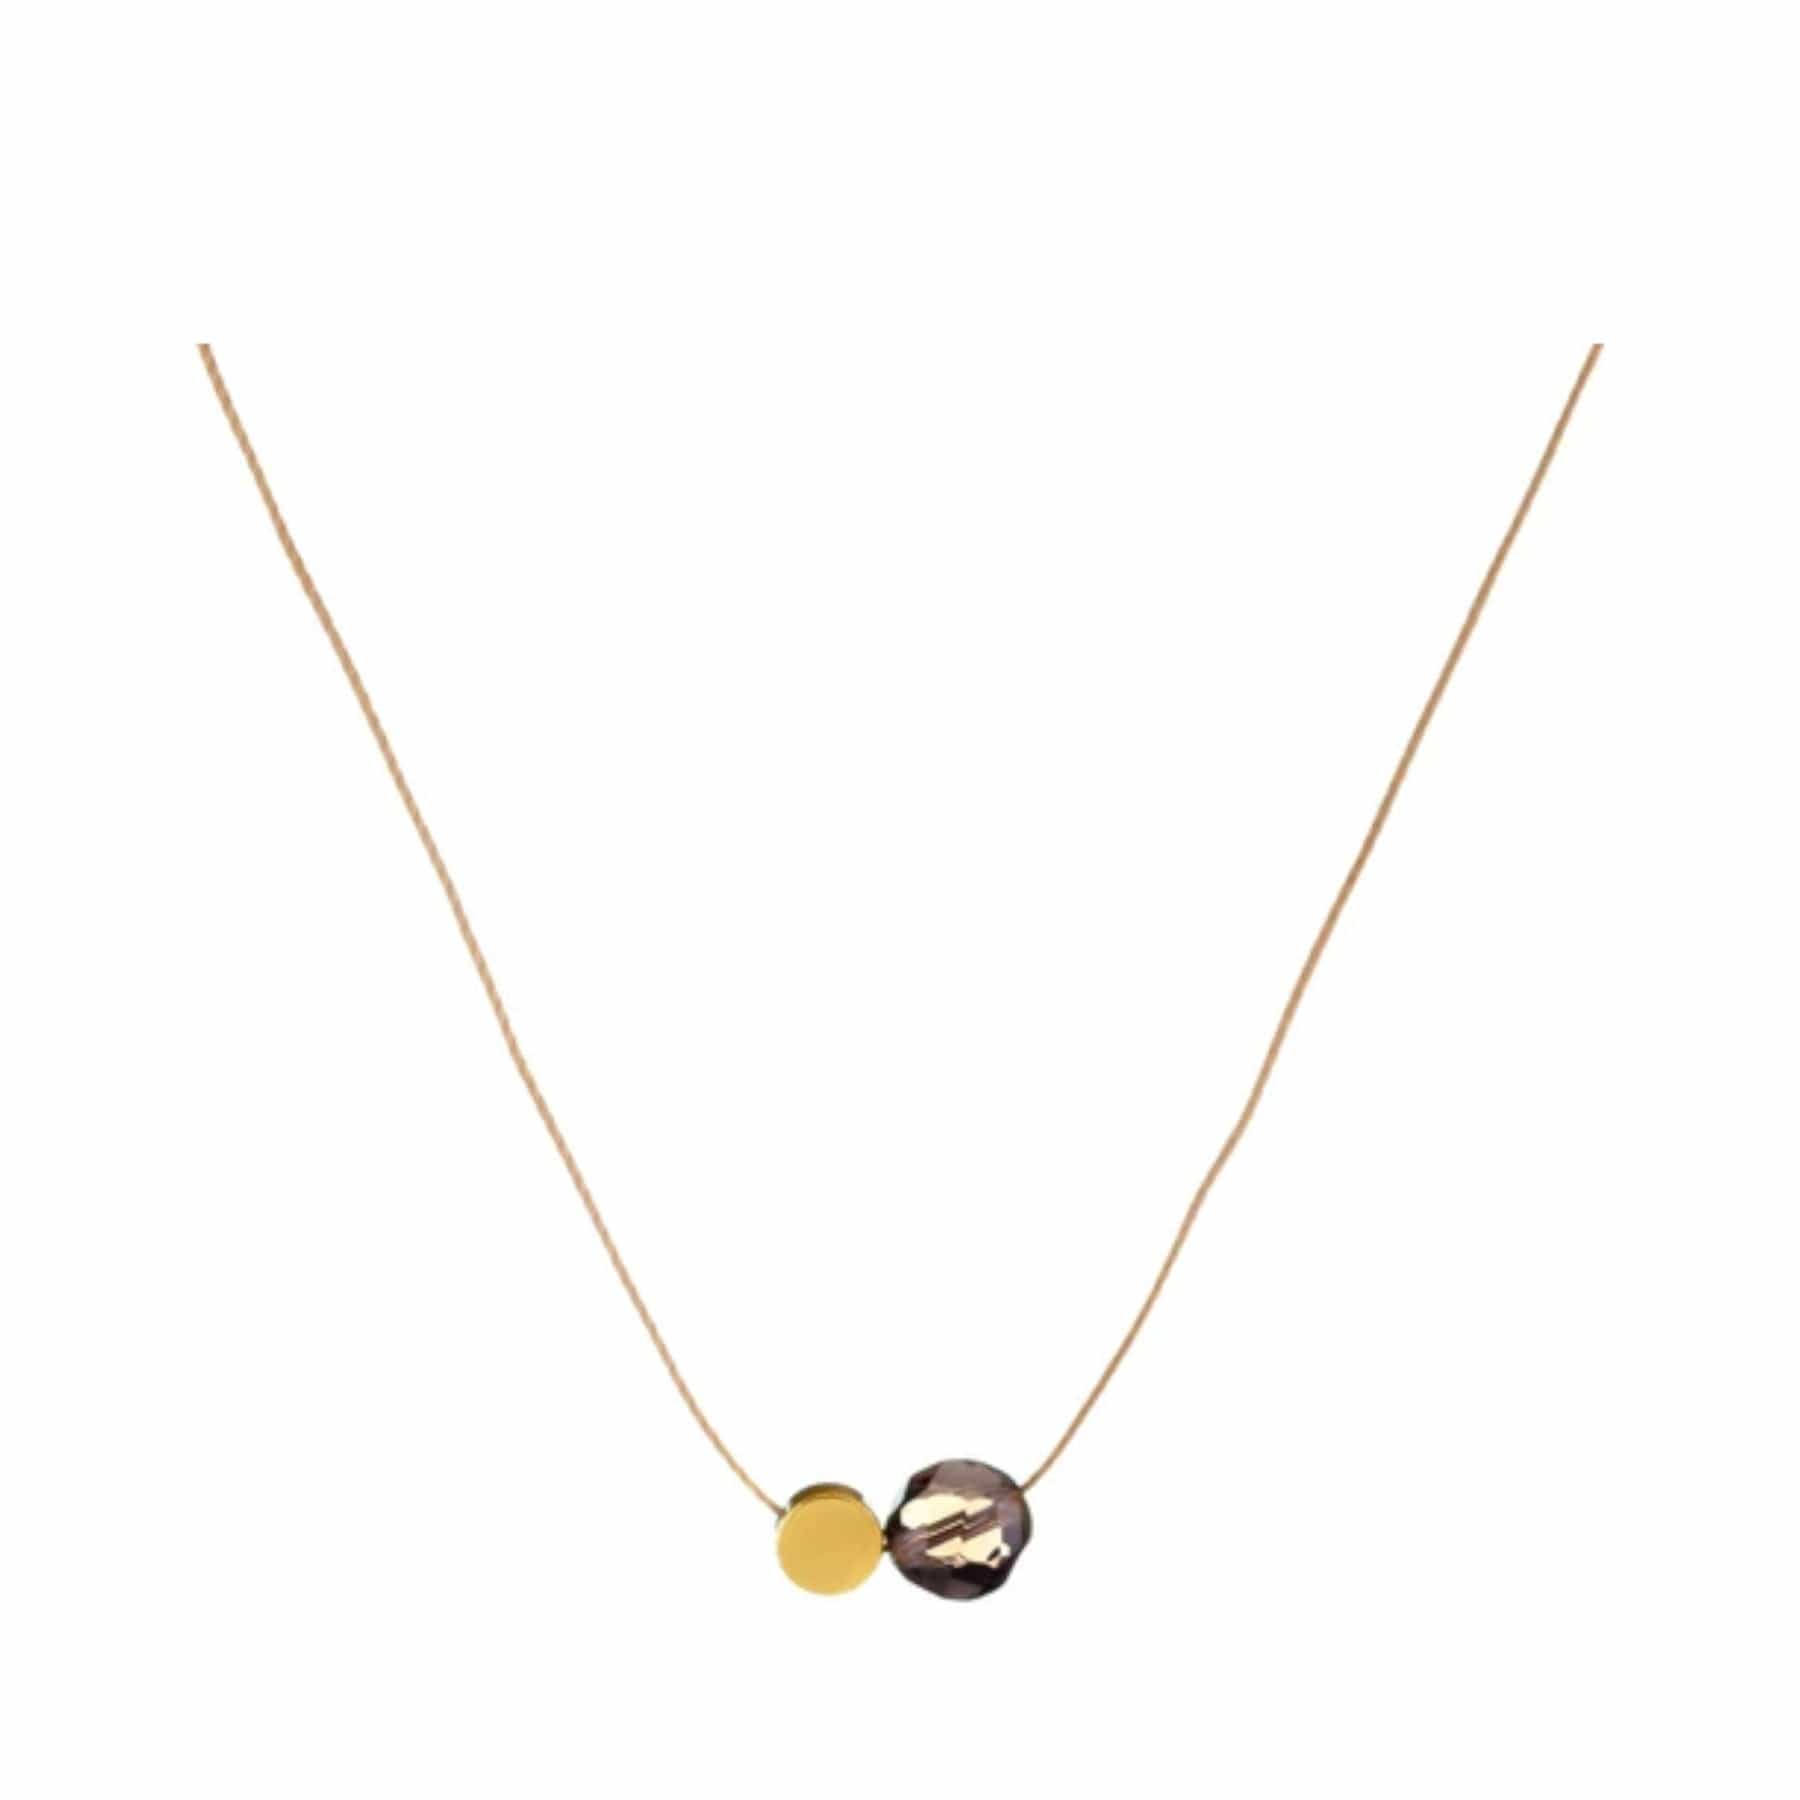 Elegant gold necklace with two pendants, one solid gold disc and one larger gemstone, on a white background.